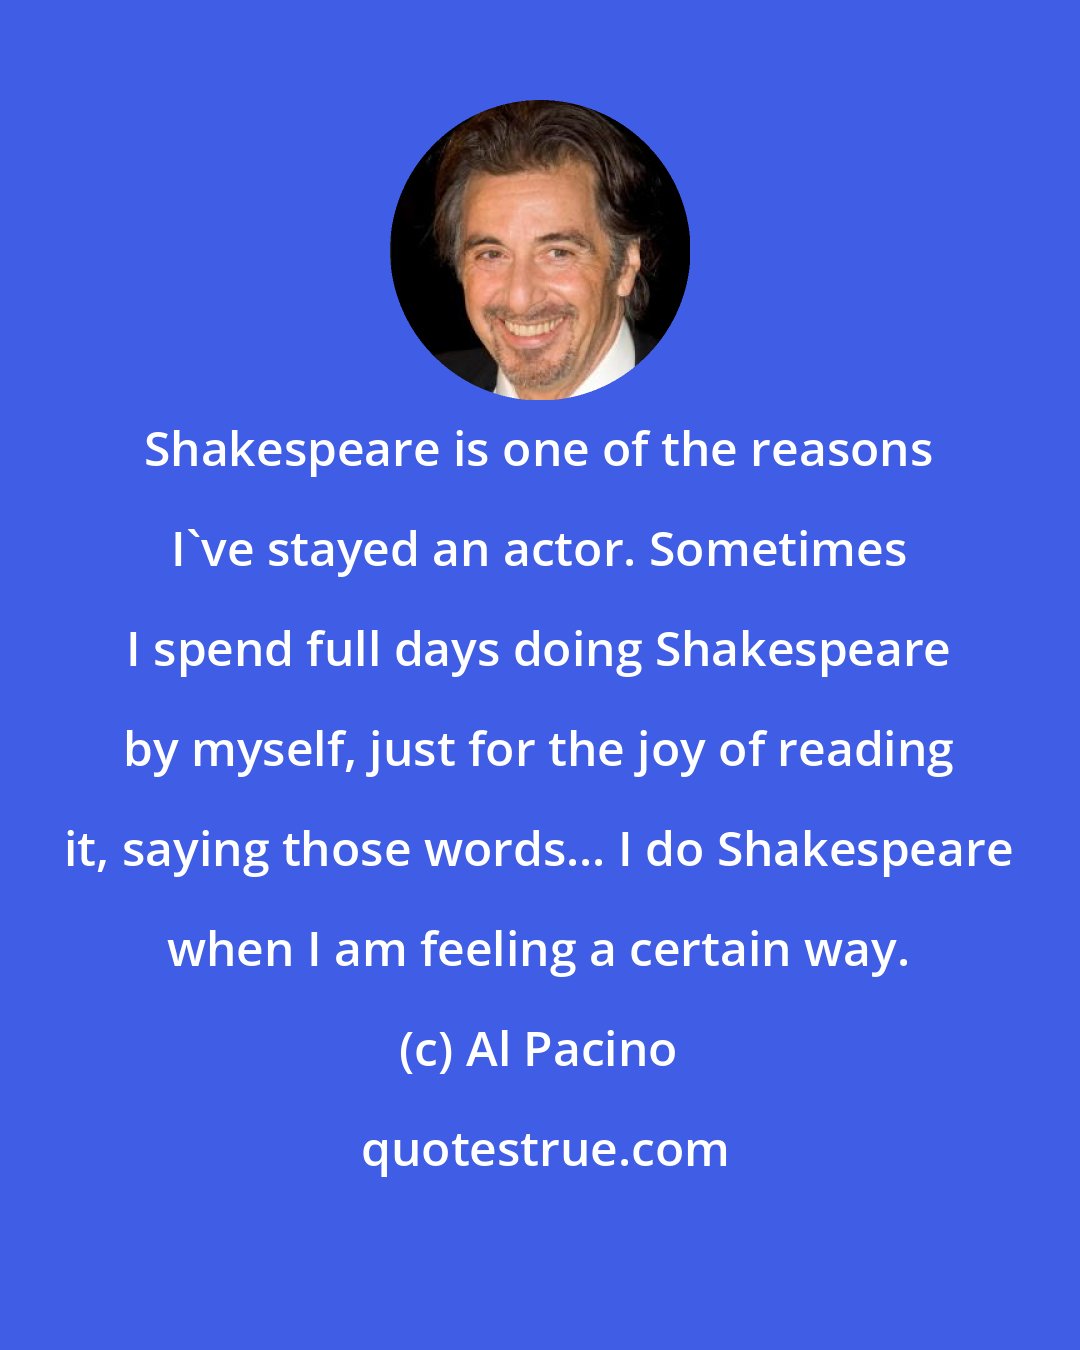 Al Pacino: Shakespeare is one of the reasons I've stayed an actor. Sometimes I spend full days doing Shakespeare by myself, just for the joy of reading it, saying those words... I do Shakespeare when I am feeling a certain way.